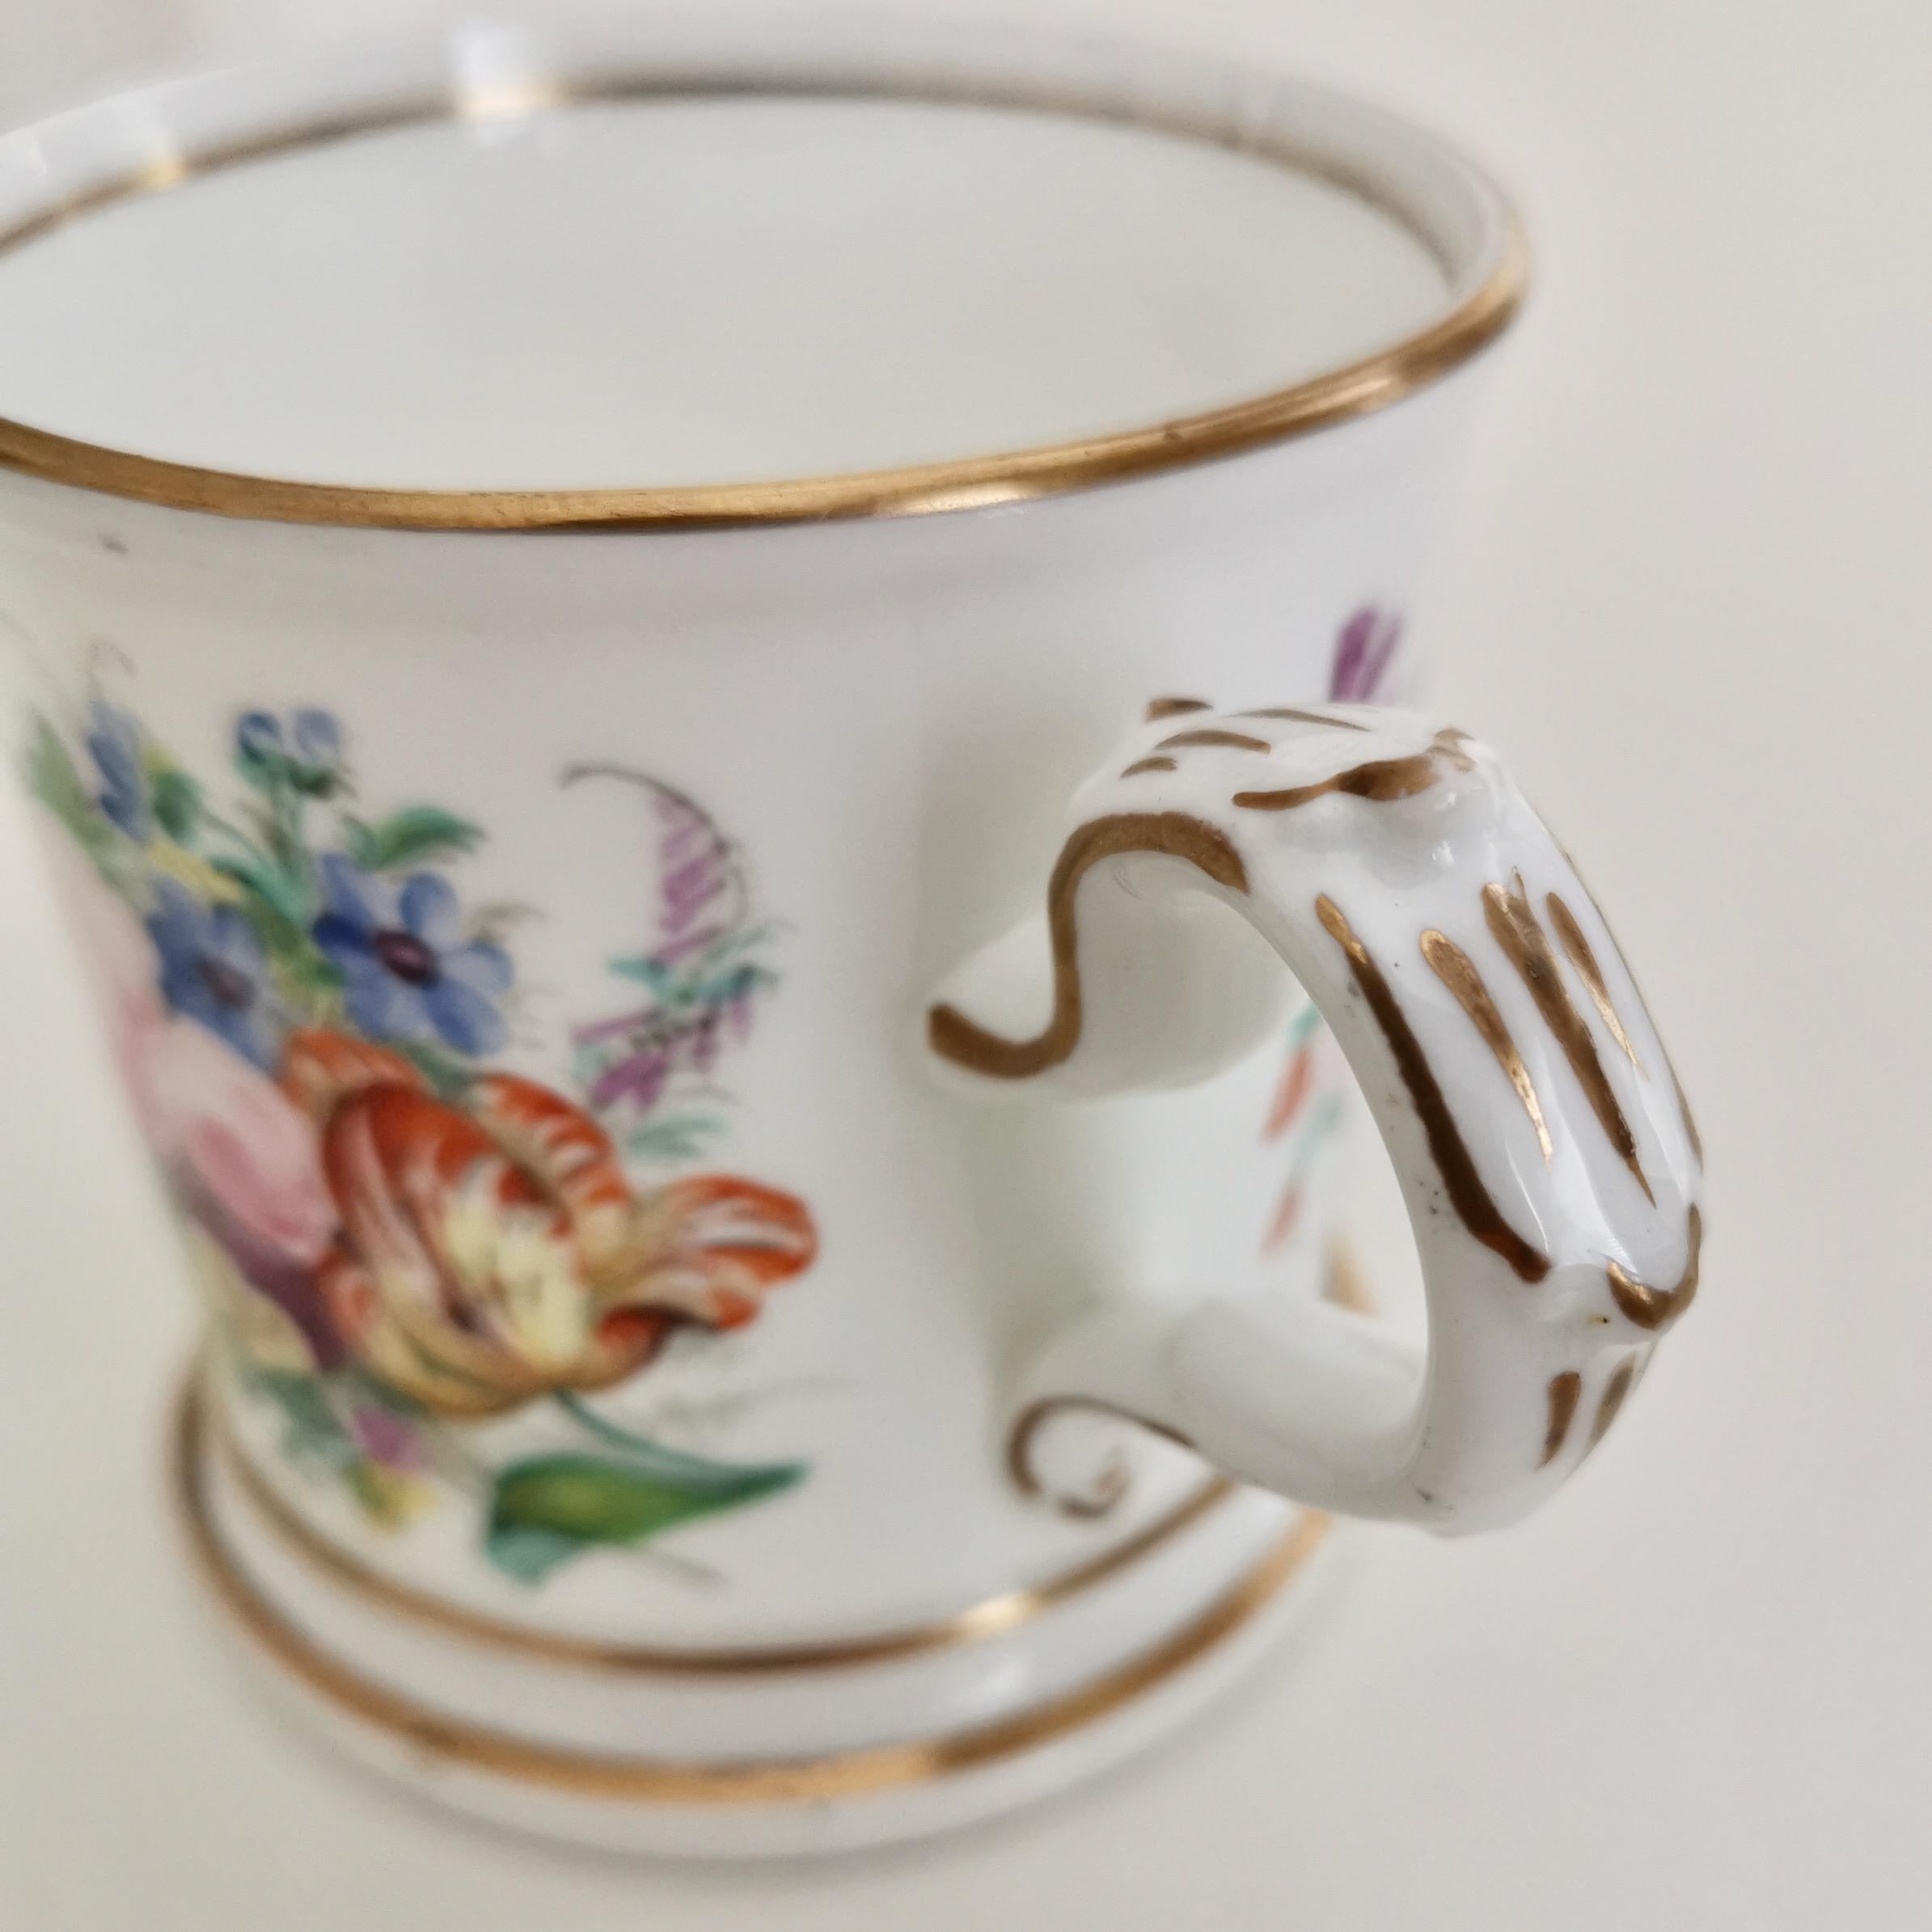 Hand-Painted Staffordshire Porcelain Christening Mug, White with Flowers, Victorian, 1867